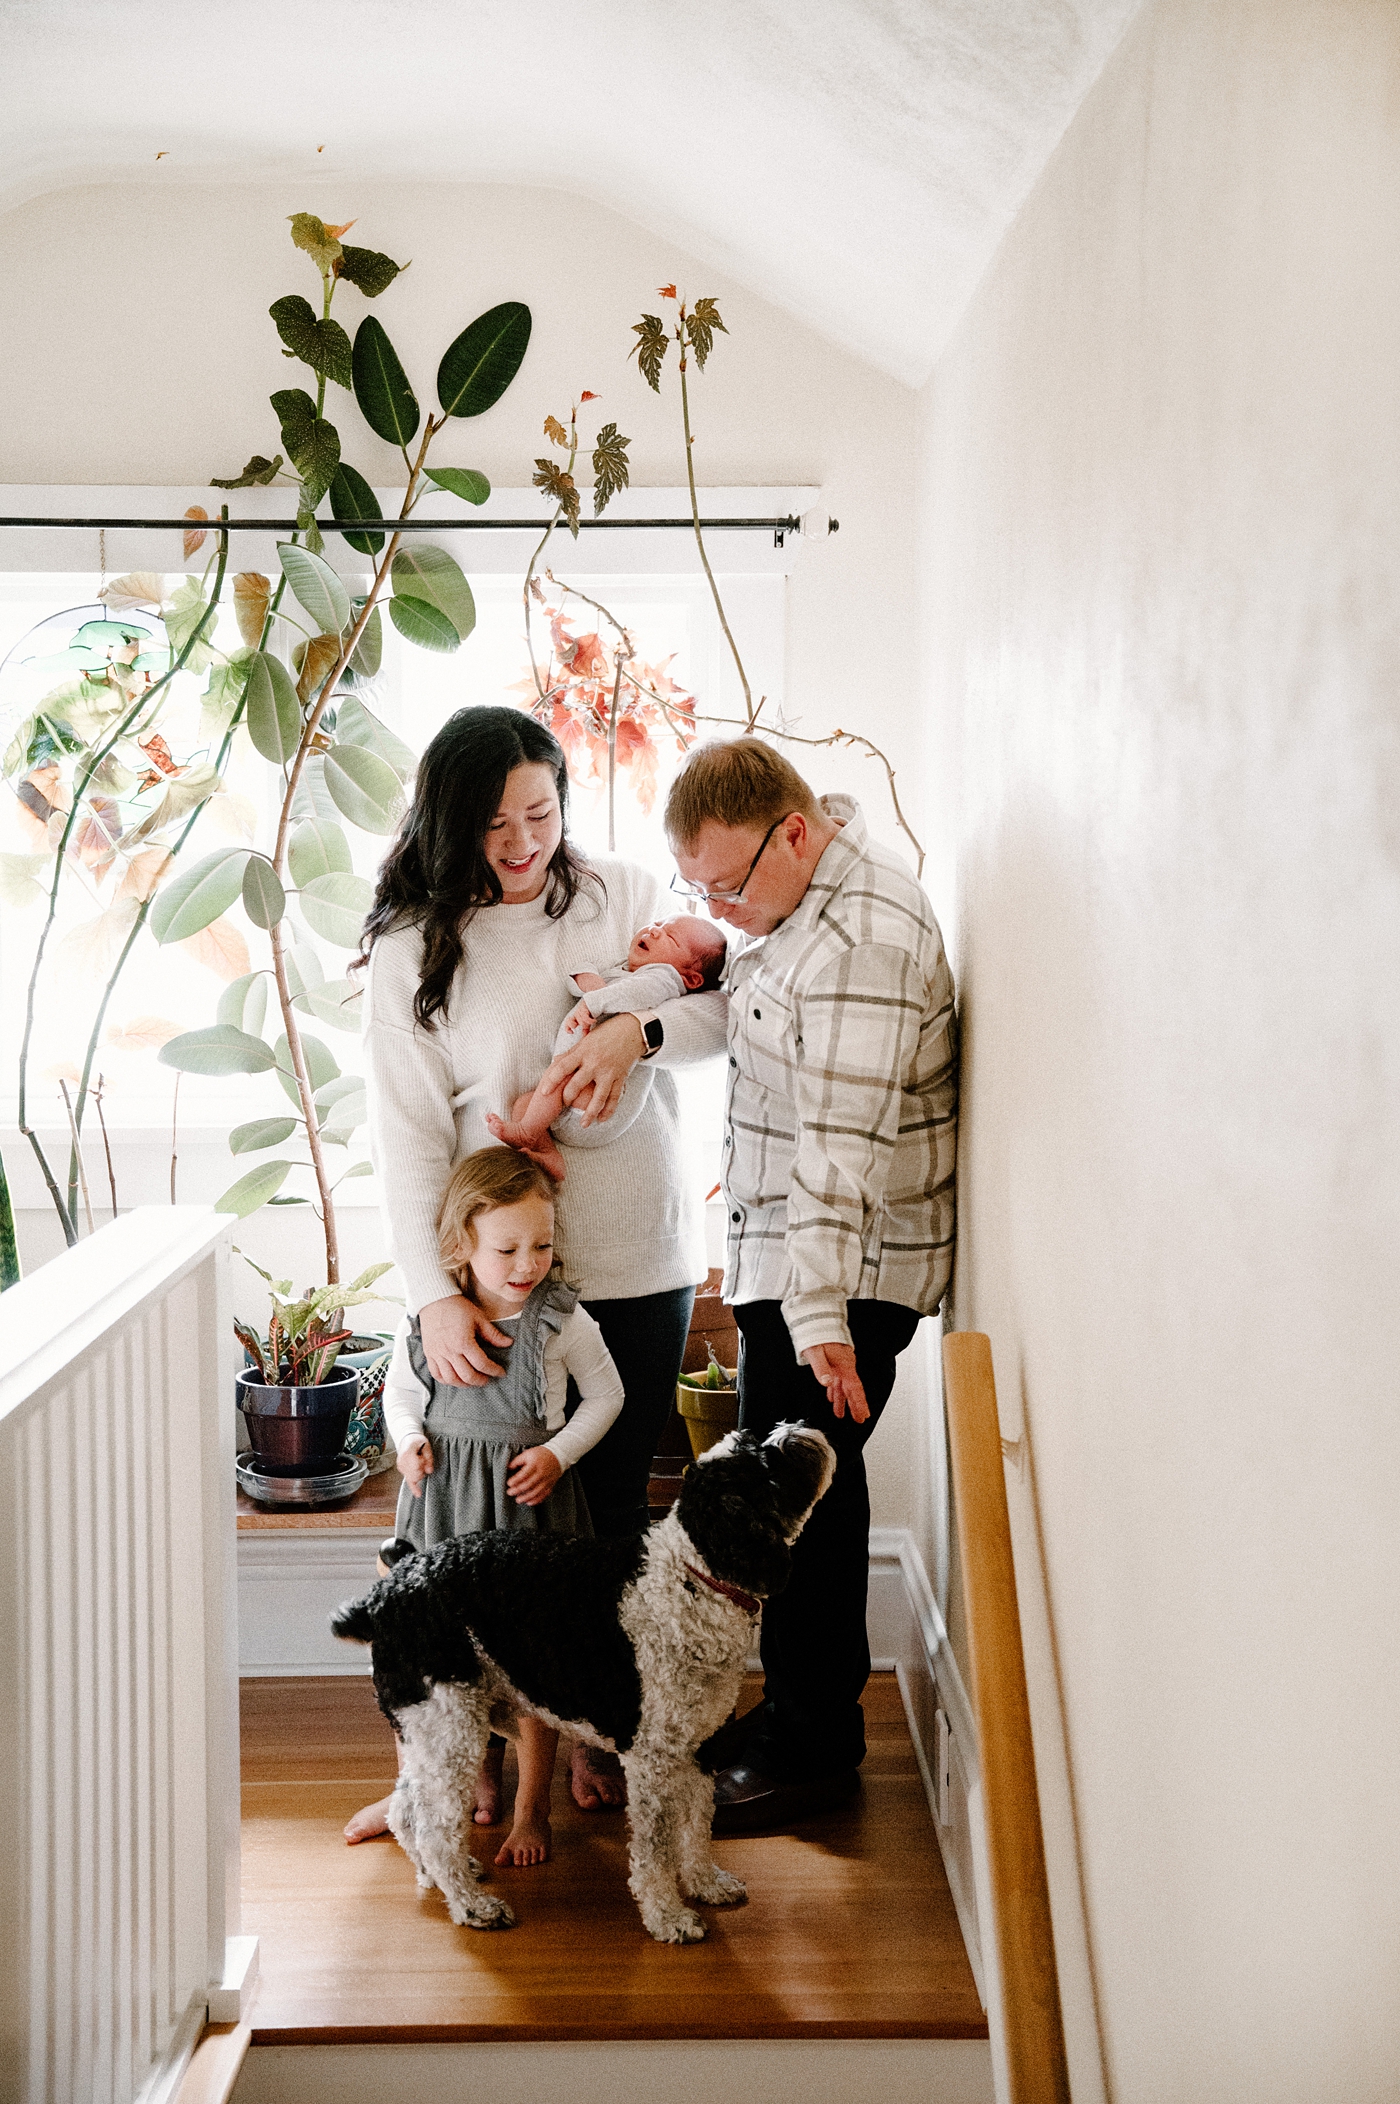 The whole family gathers at the top of the stairs in front of a wall of plants during in home newborn session. Photo by Meg Newton Photography.